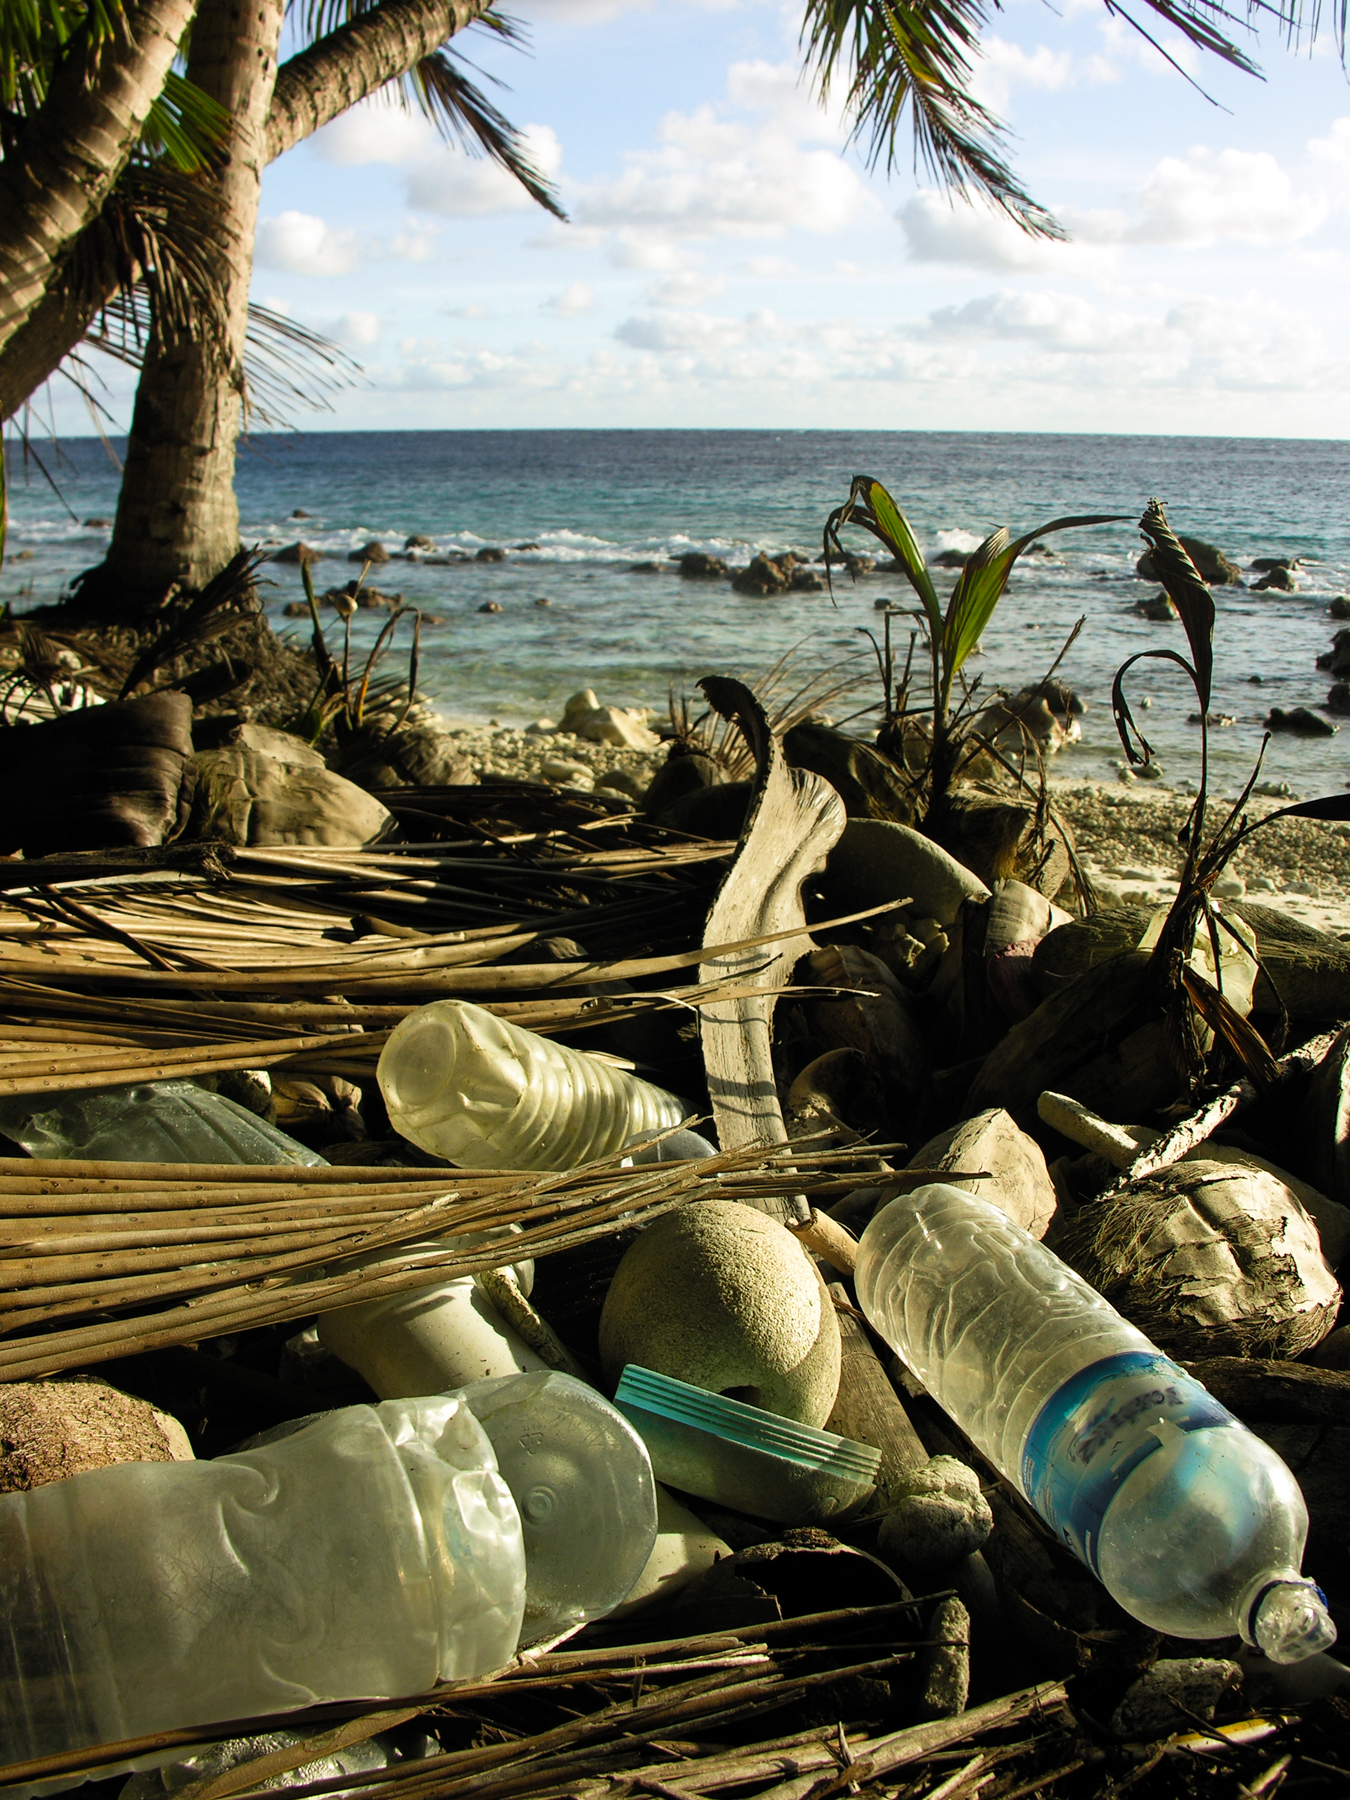 An estimated 260 billion tons of plastic are currently polluting the oceans.